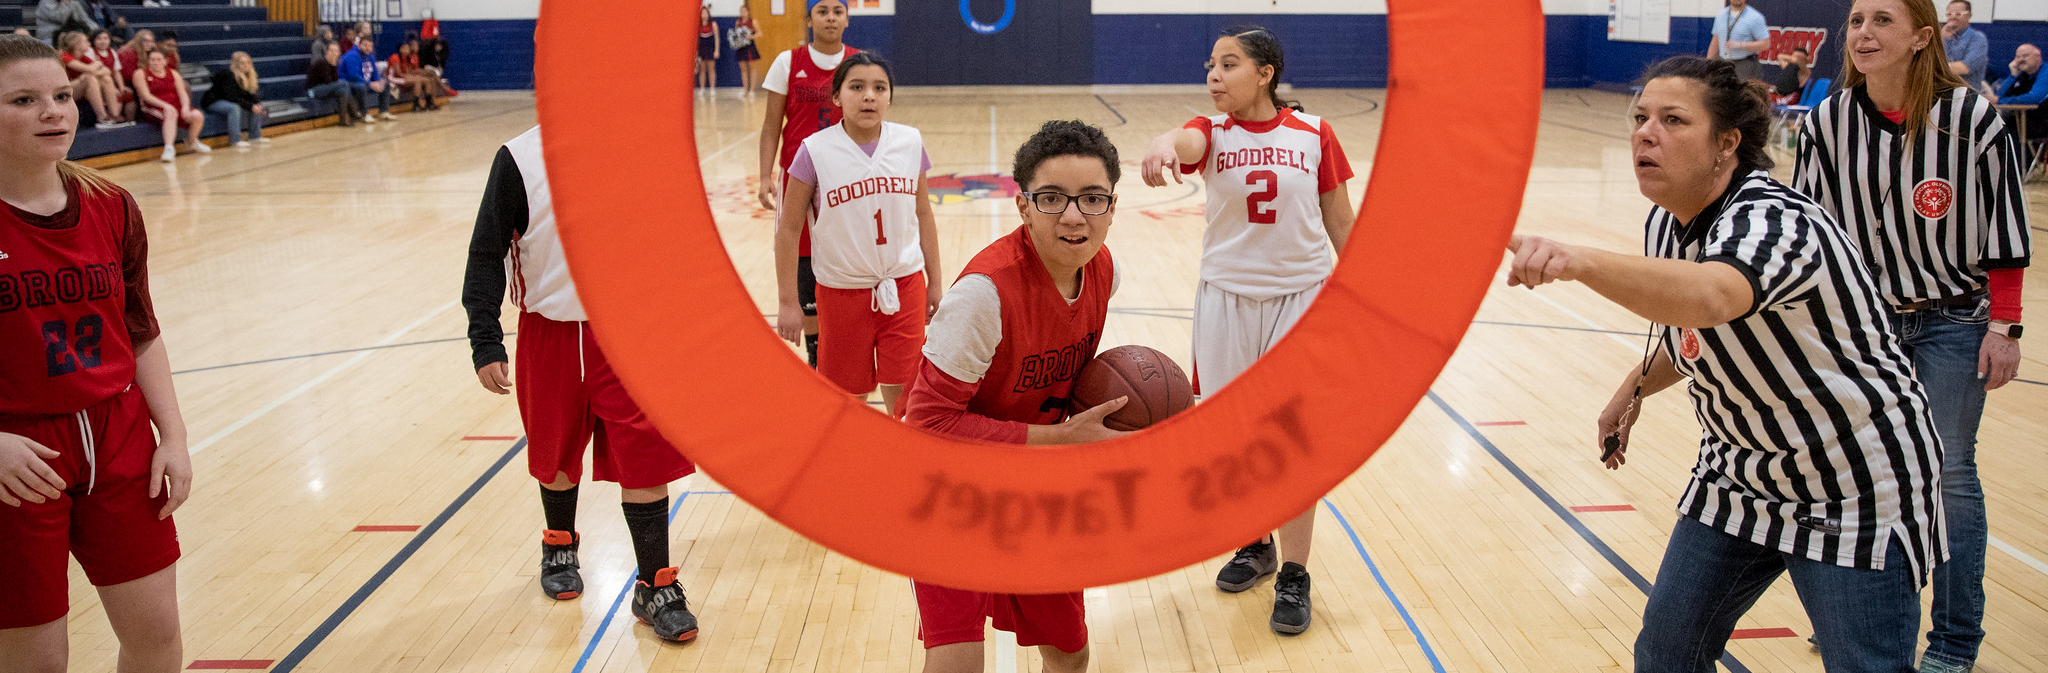 Inclusion Revolution at DMPS Spreads to “Unified” Hoops